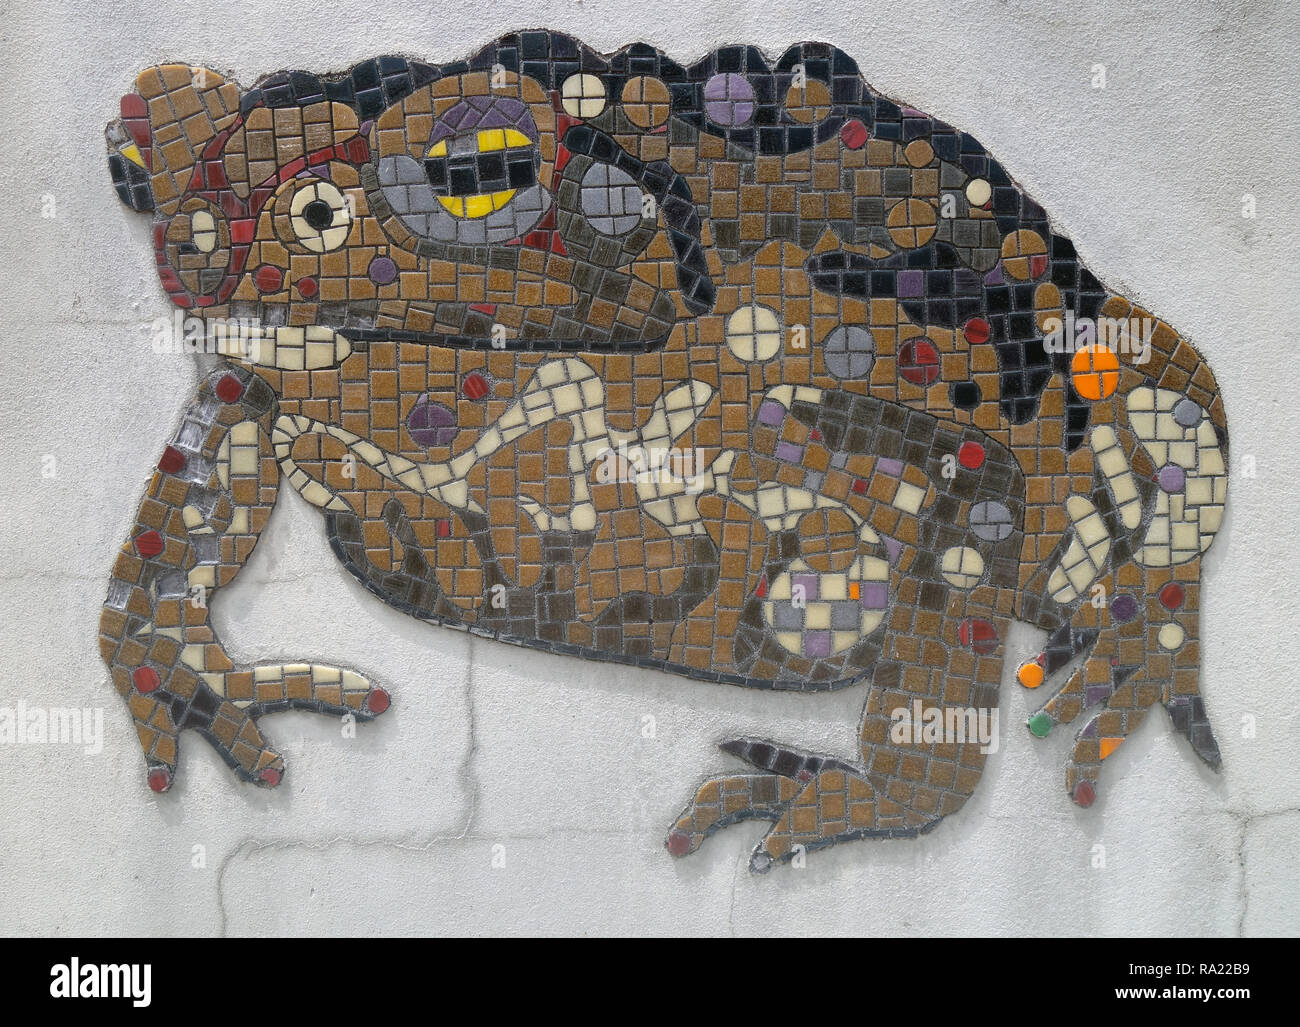 Detail of cane toad mosaic at Cane Toad World, celebrating the site where these now notorious invasive pests were first released in Australia, Gordonv Stock Photo